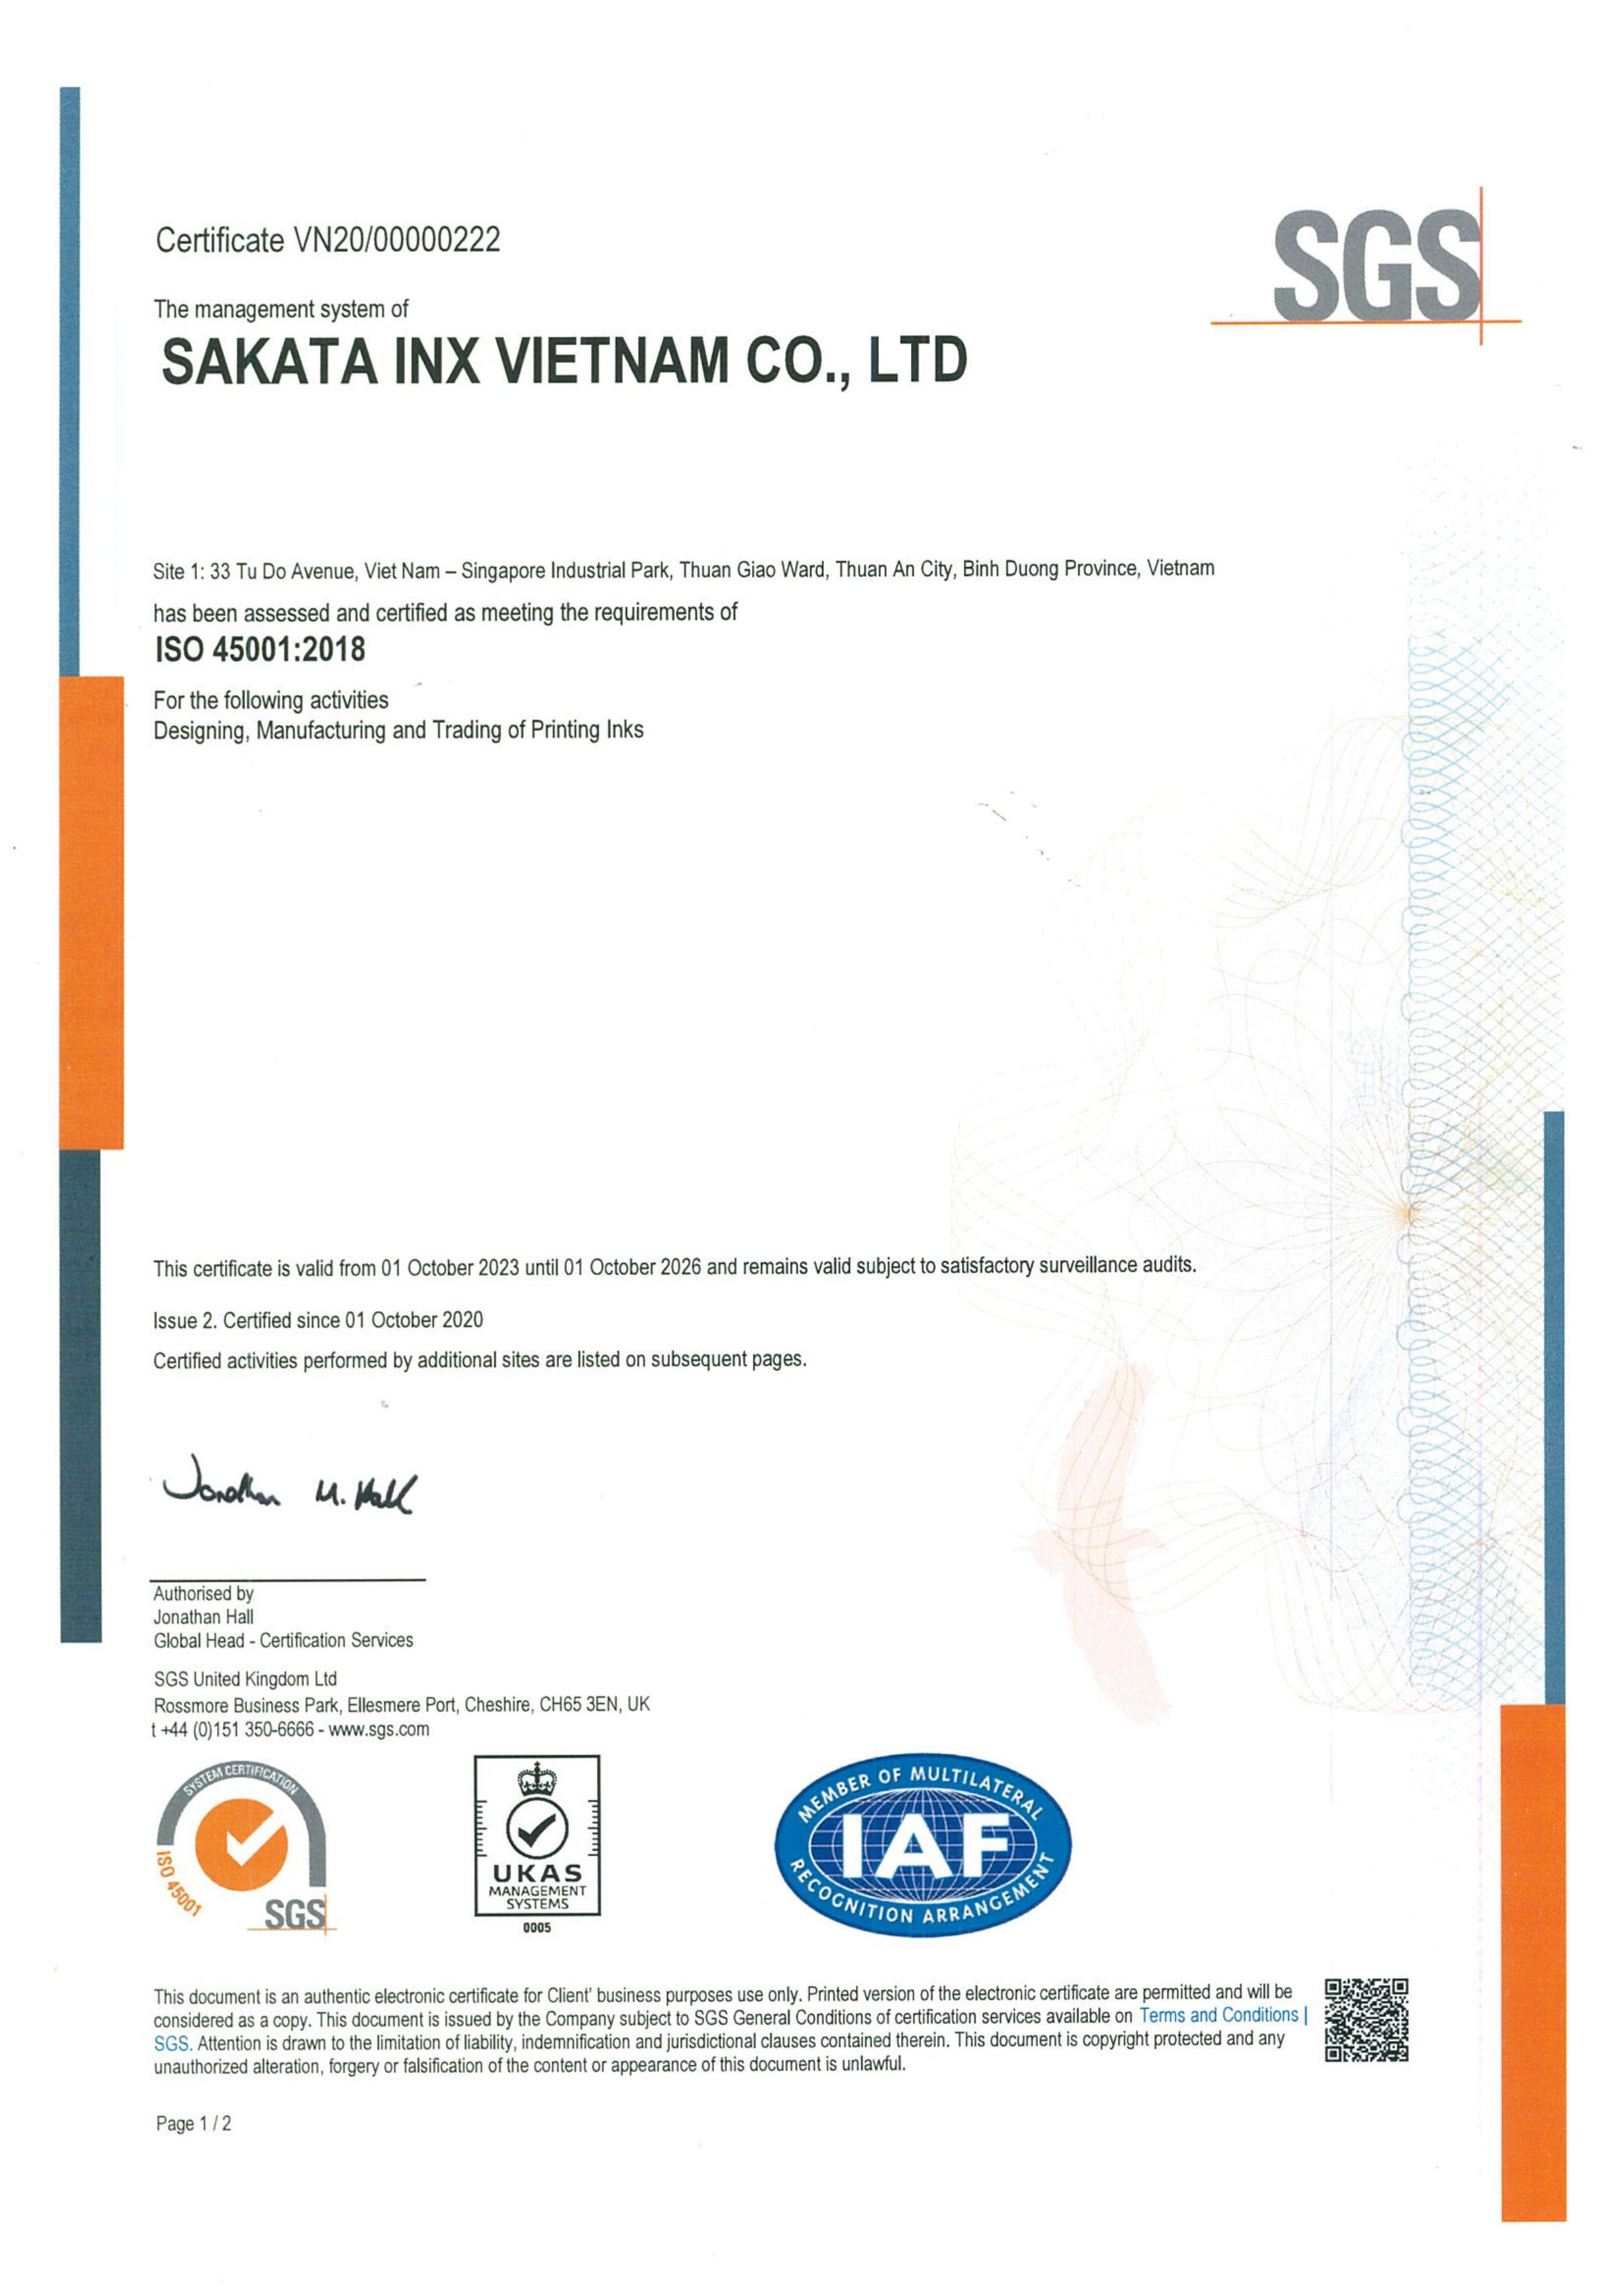 ISO 45001:2018 Certification in Occupational health and safety management system Standards